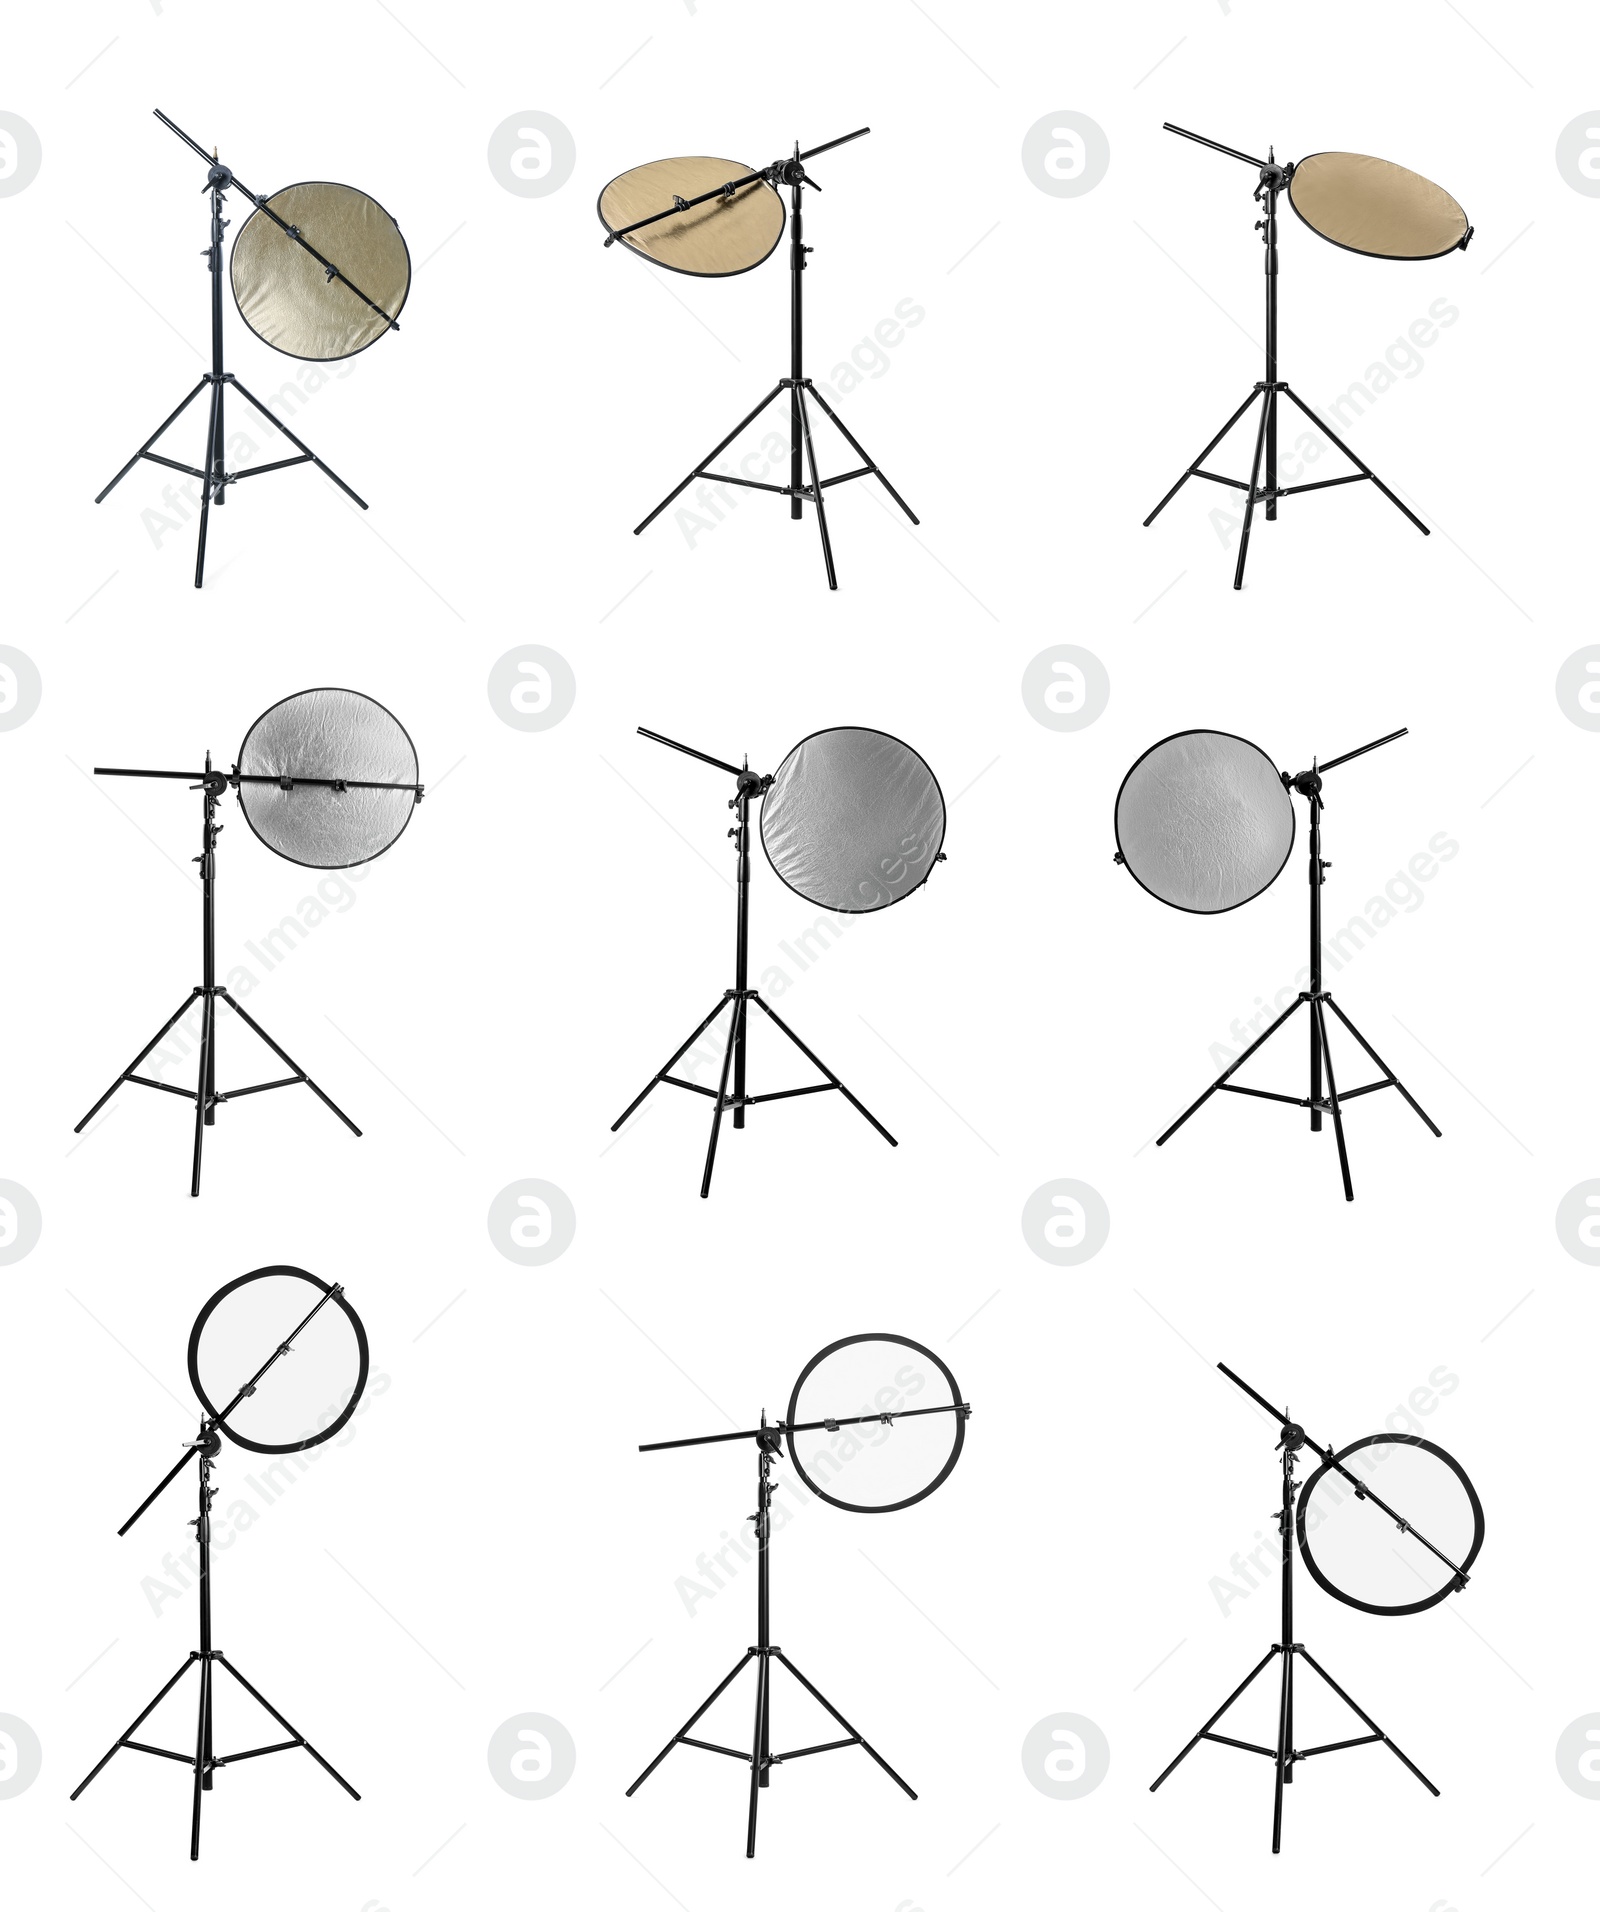 Image of Set of tripods with different reflectors on white background. Professional photographer's equipment